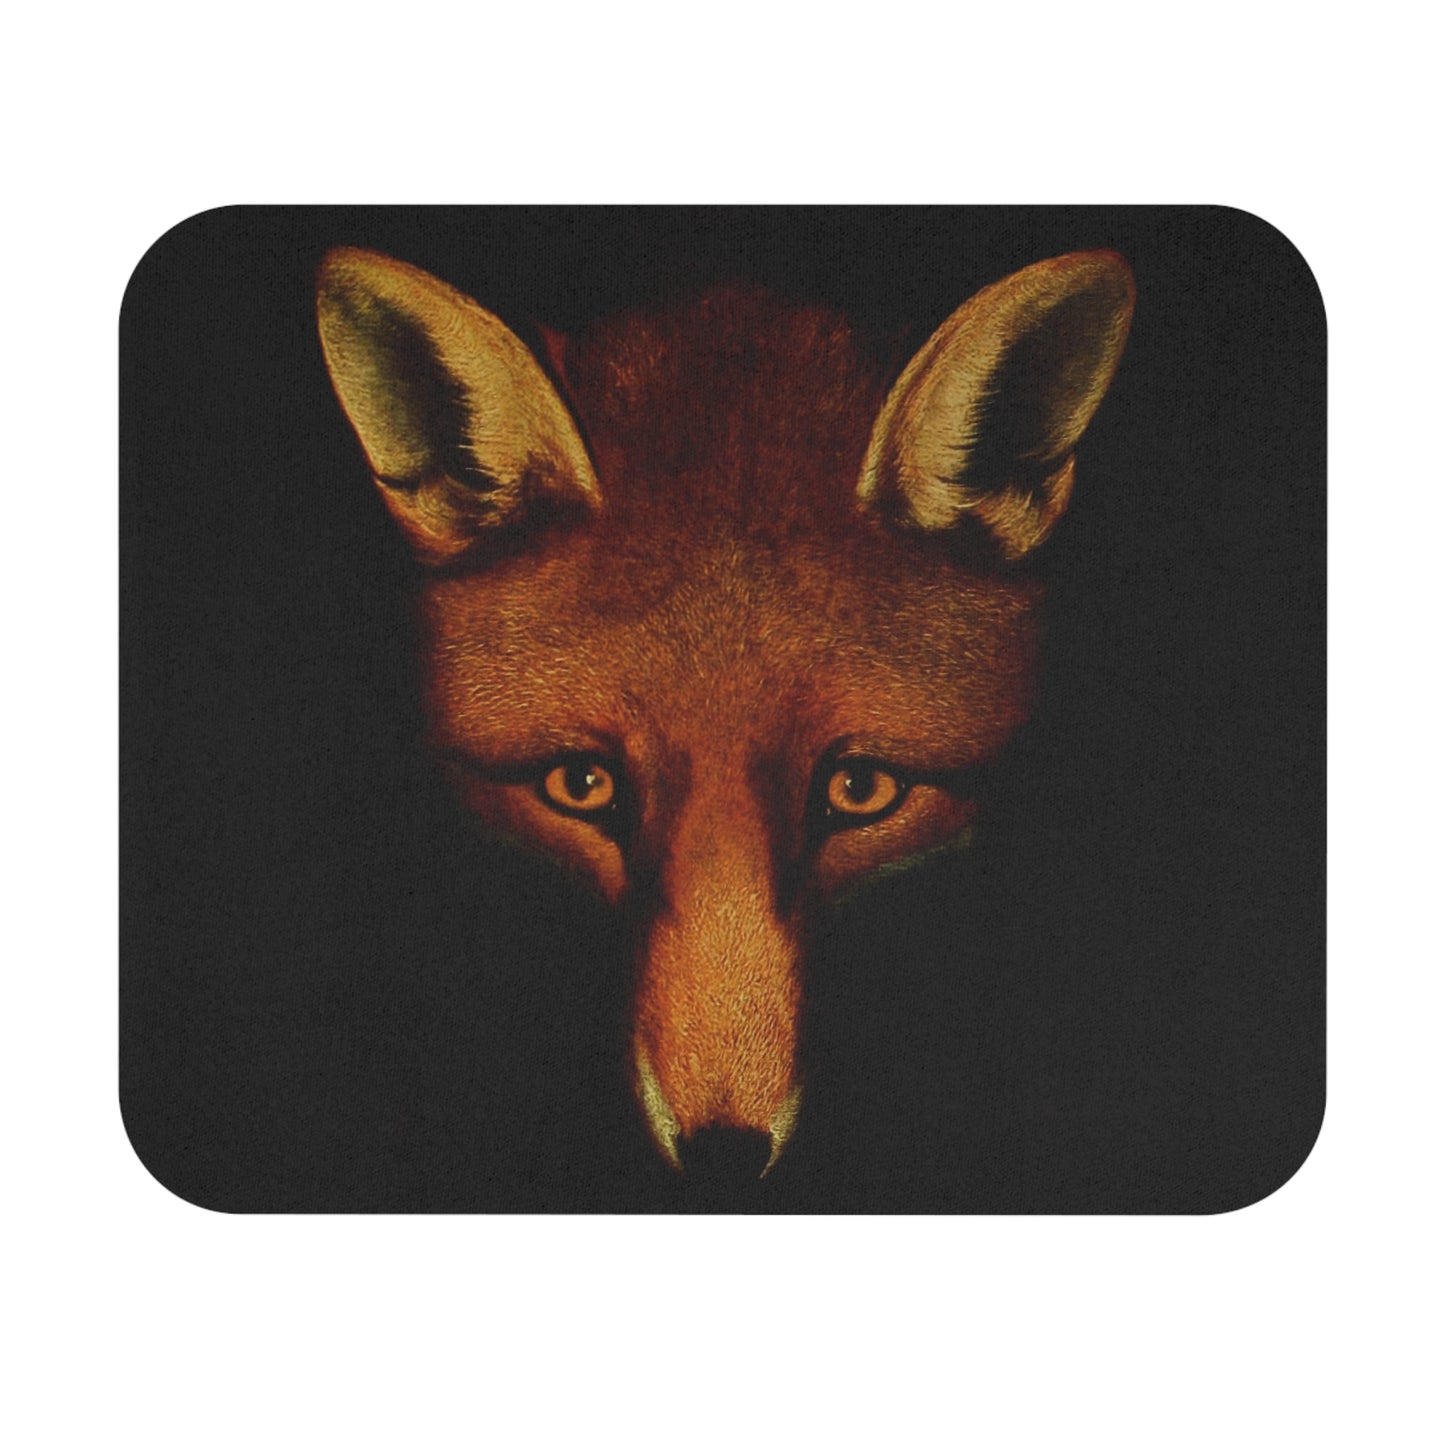 Red Fox Mouse Pad showcasing Reynard the fox art, adding whimsy to desk and office decor.